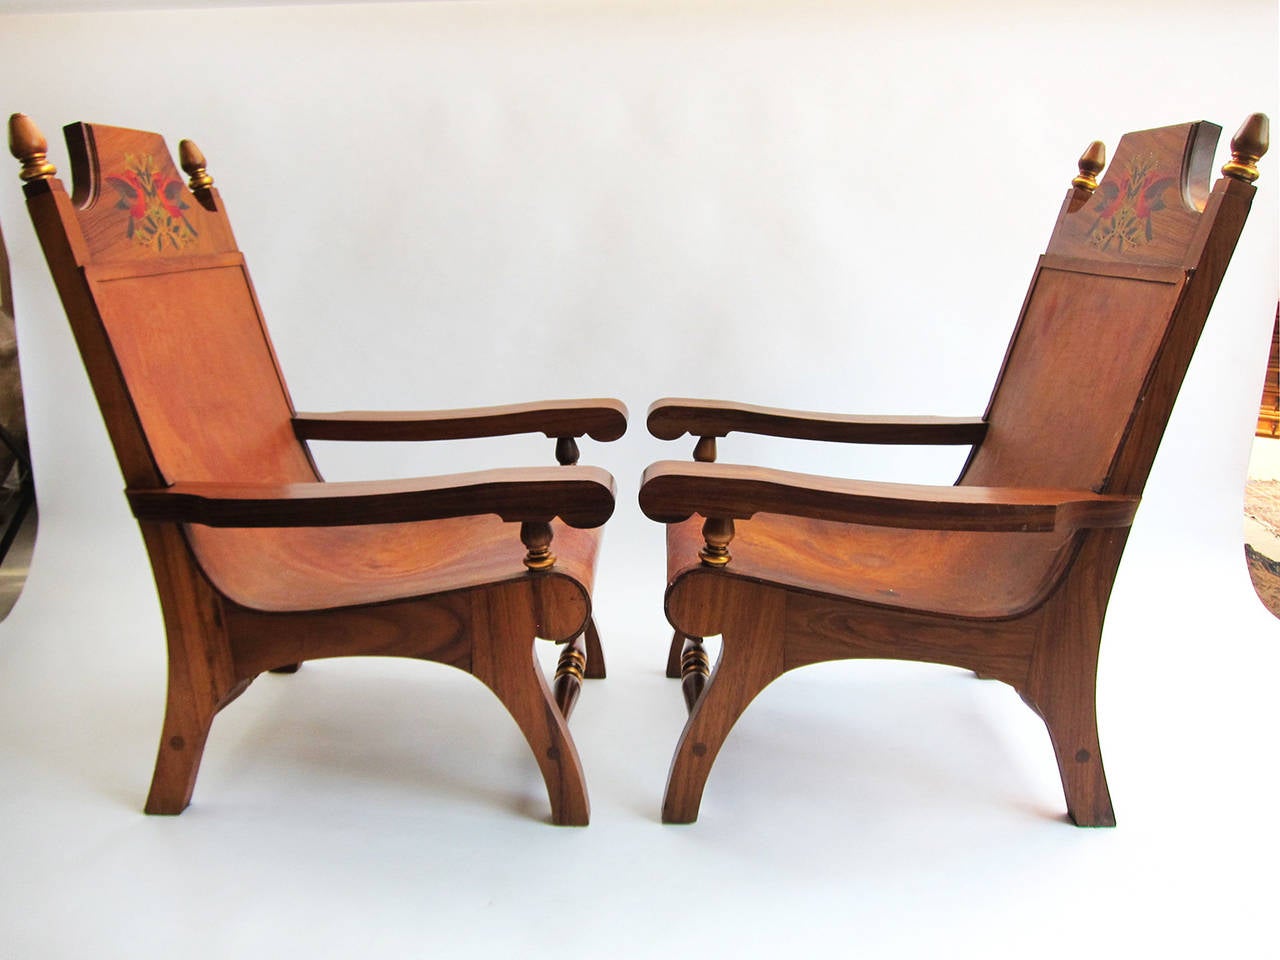 A very nice pair of armchairs made from tropical perota wood with hand-painted head supports, gold leaf detailing and leather seats by Alejandro Rangel Hidalgo (whose style was known as “Rangelino”). 
Rangel Hidalgo (1923-2000) was an artist,